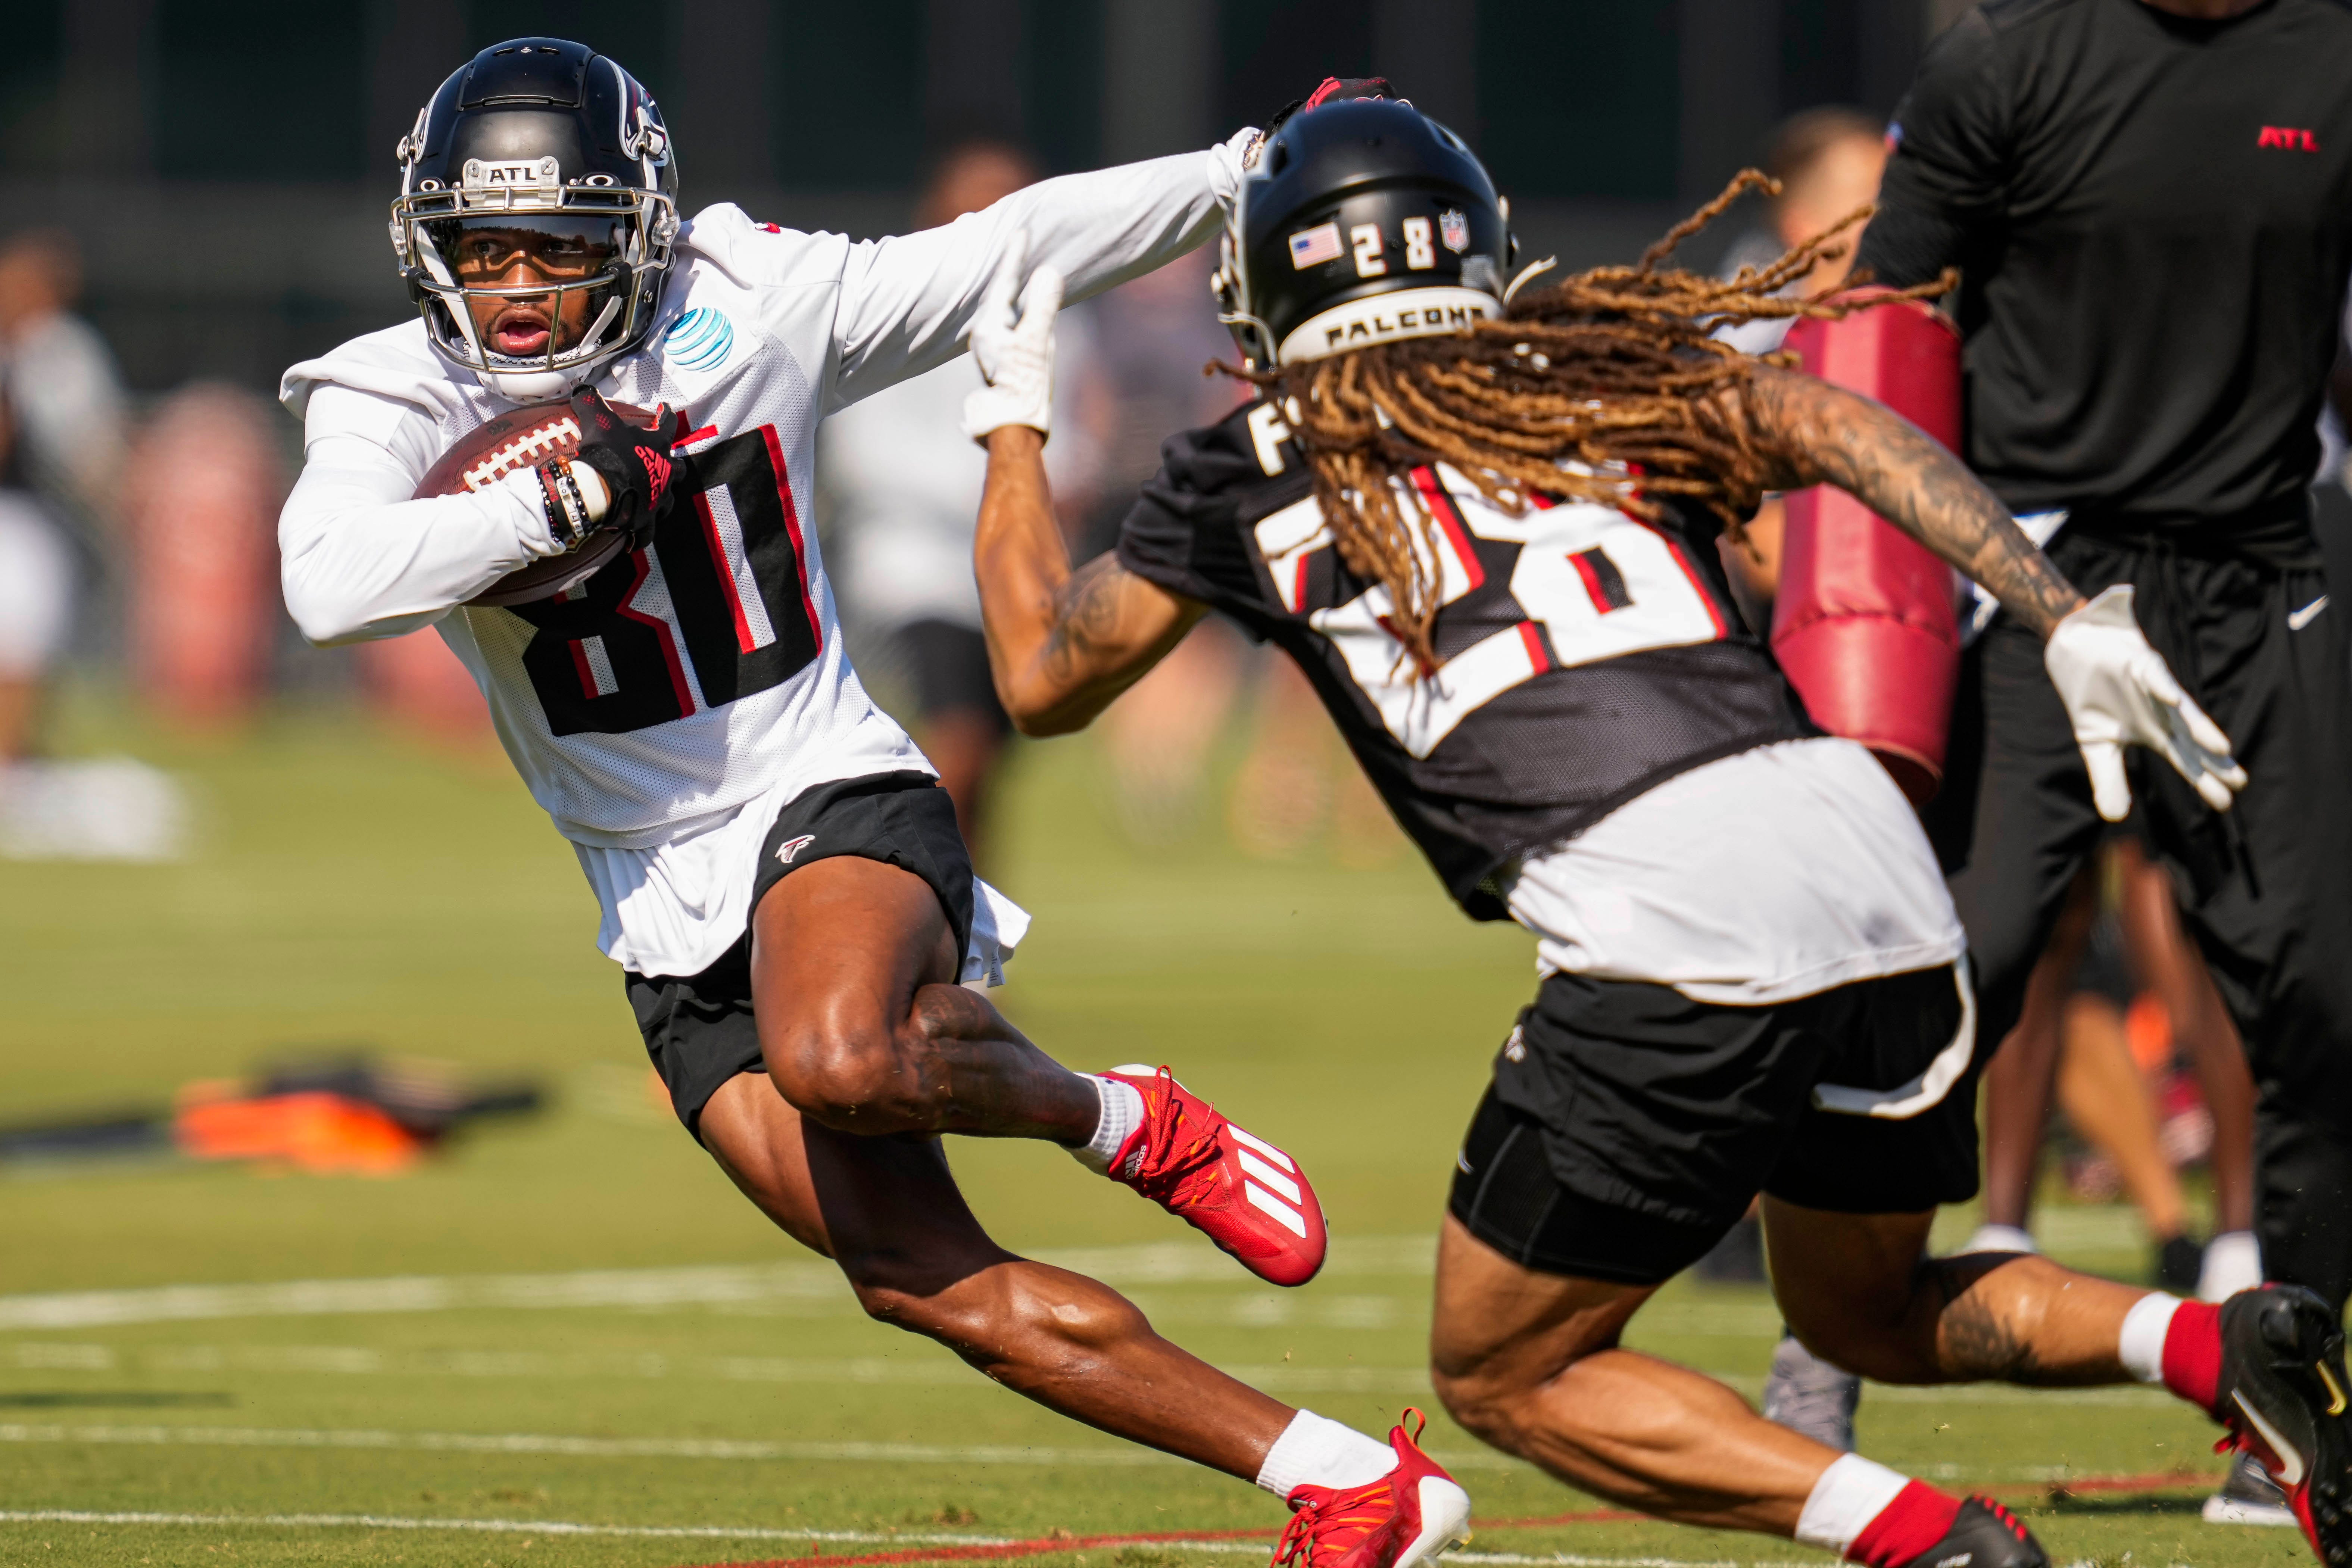 Falcons practice squad WR Cameron Batson arrested after police chase